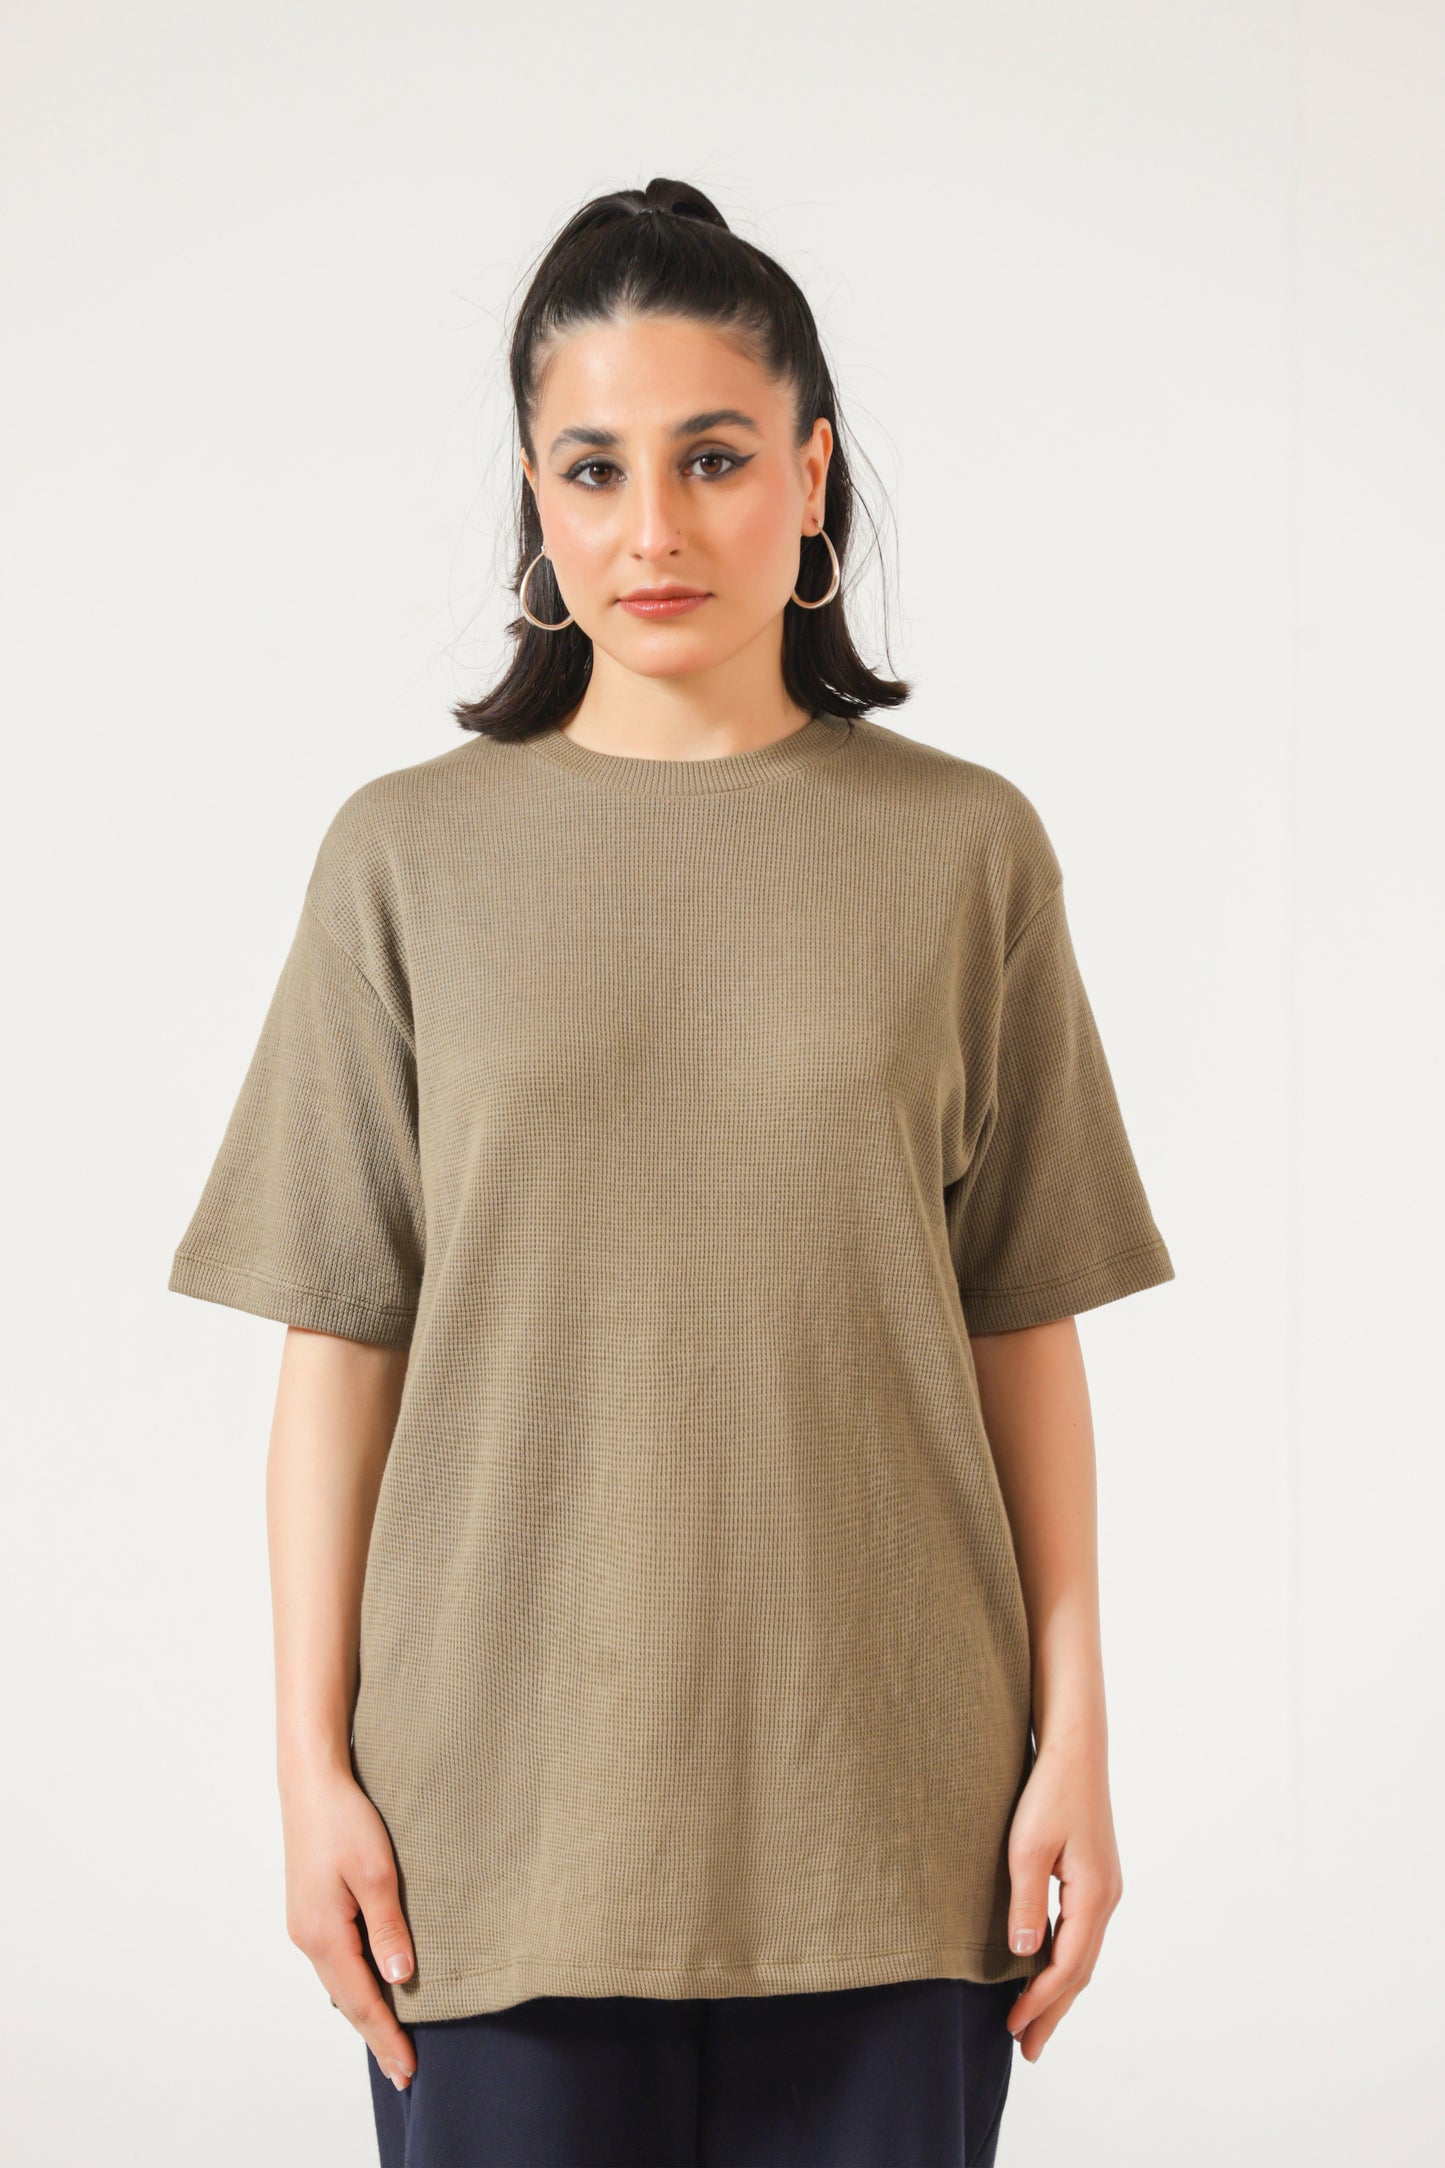 Textured-Knit T-shirt in Sand